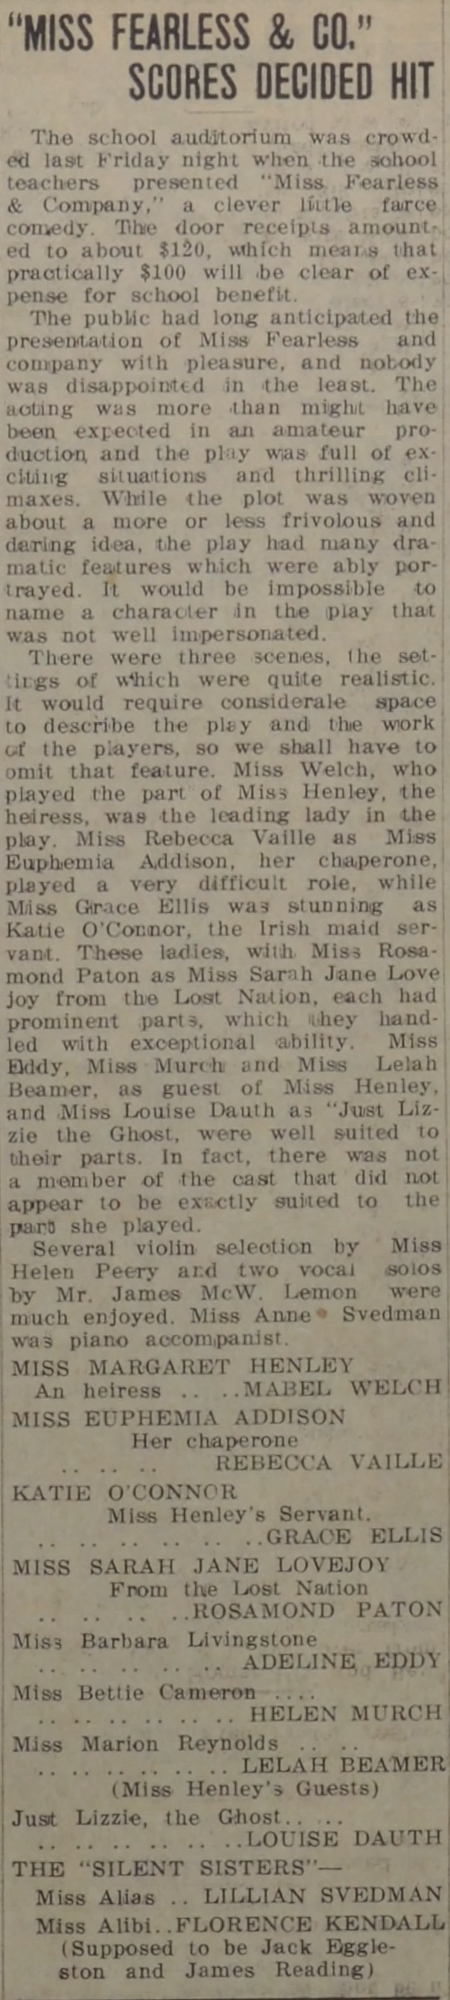 Dauth Family Archive - 1916-03-16 - Windsor Beacon - Louise Dauth In School Play